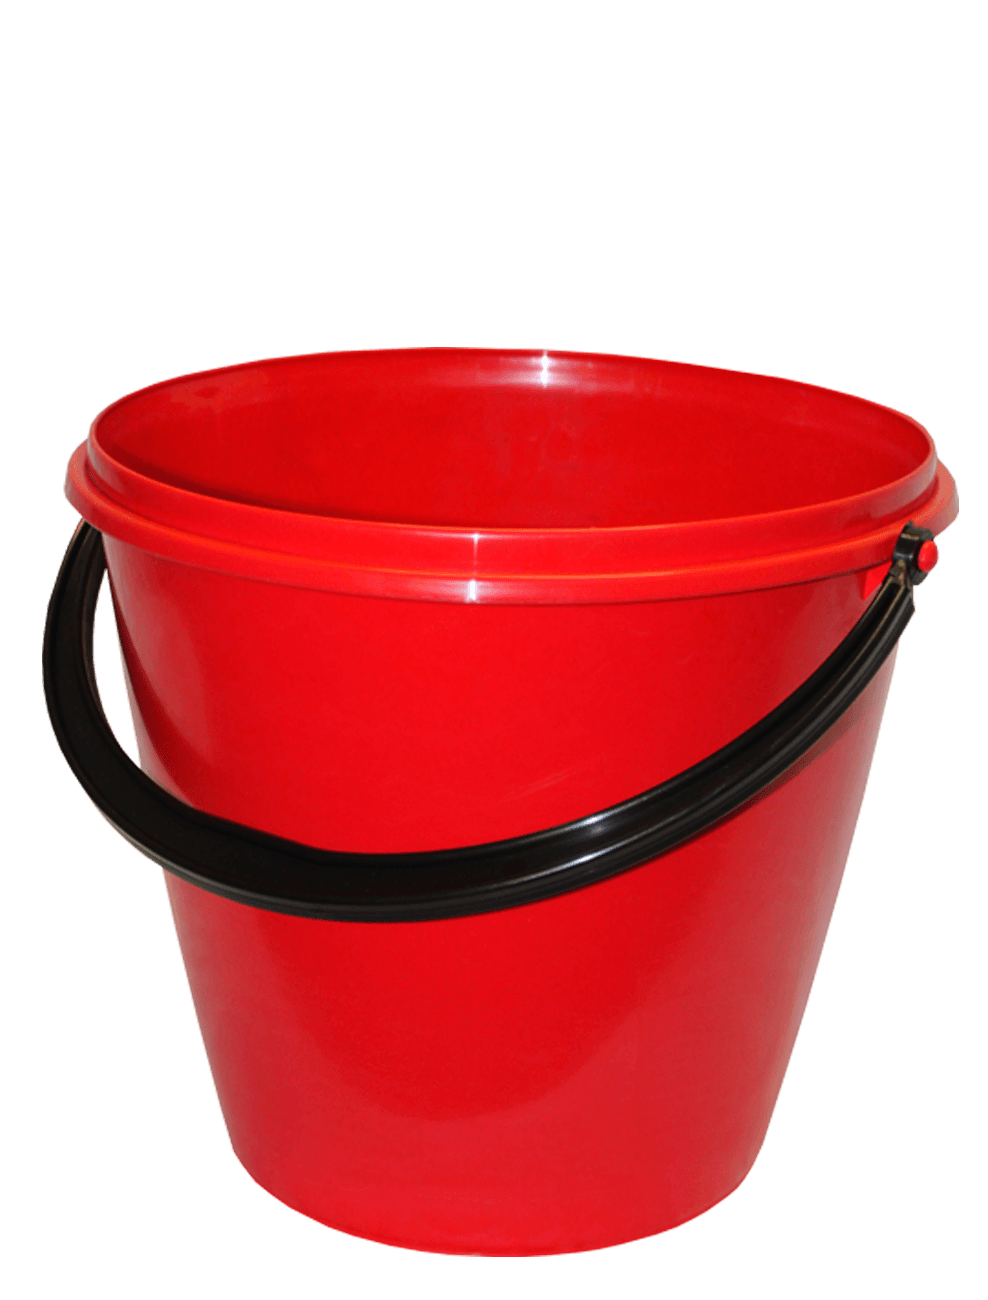 Plastic Red Bucket Png Image PNG Image